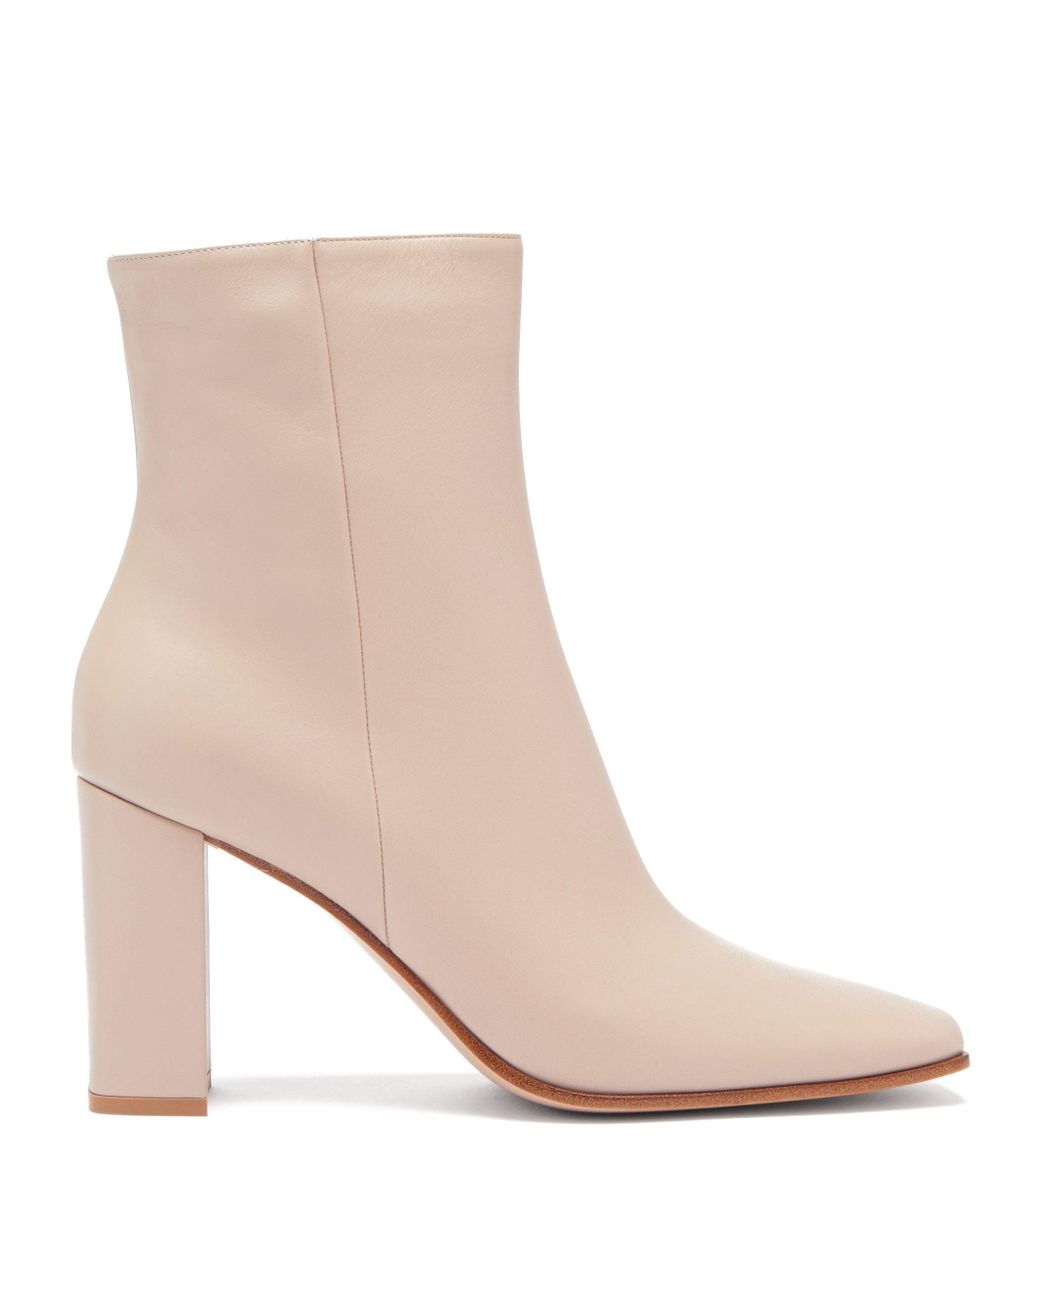 Gianvito Rossi Hyder 85 Leather Ankle Boots in Beige (Natural) - Lyst